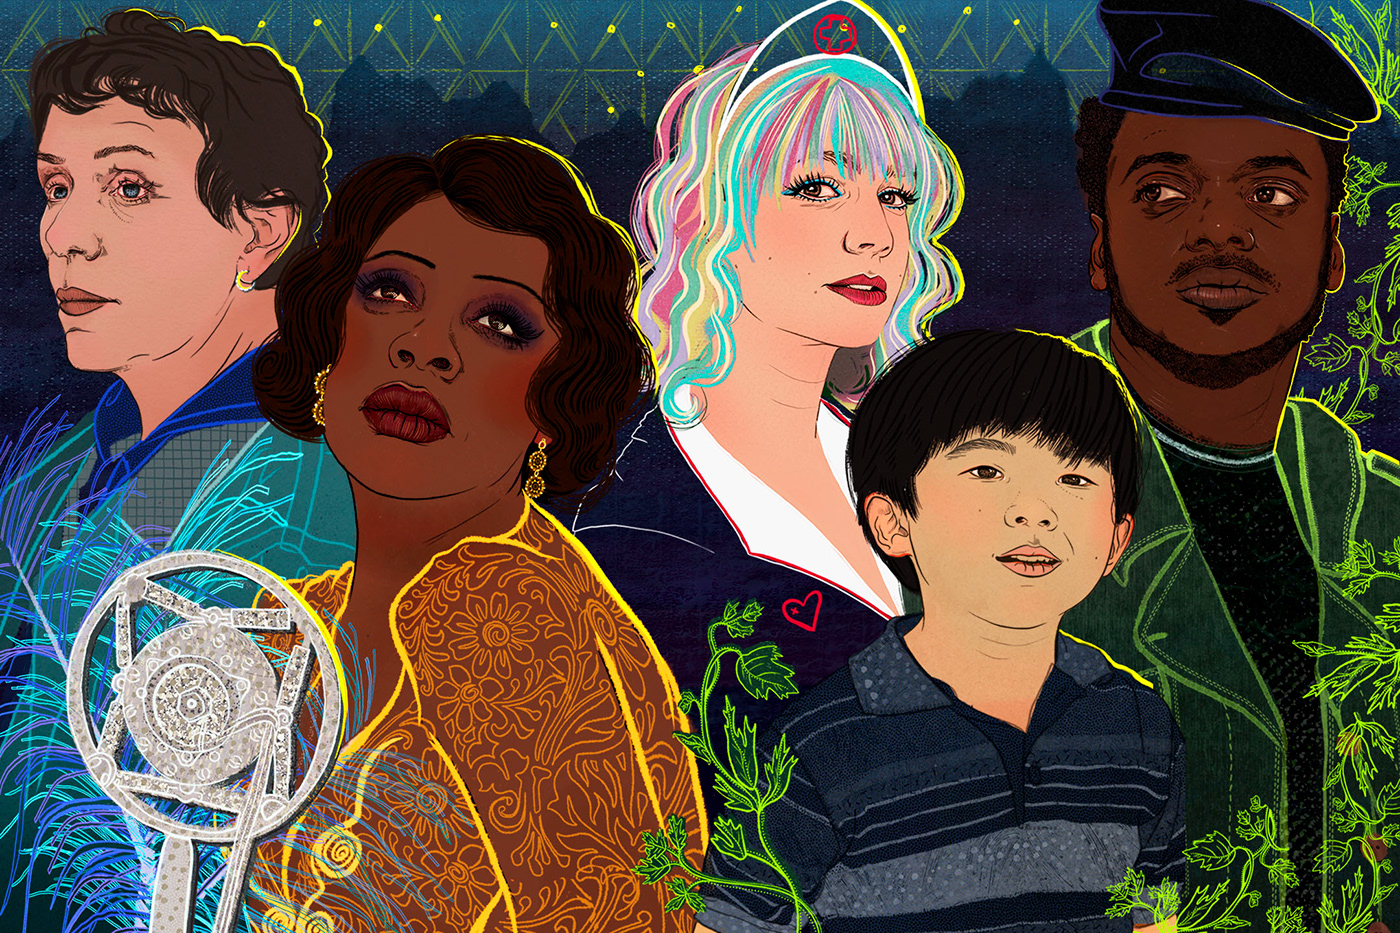 Illustration of 2021 Oscar nominees by Ariana Pacino for Los Angeles Times